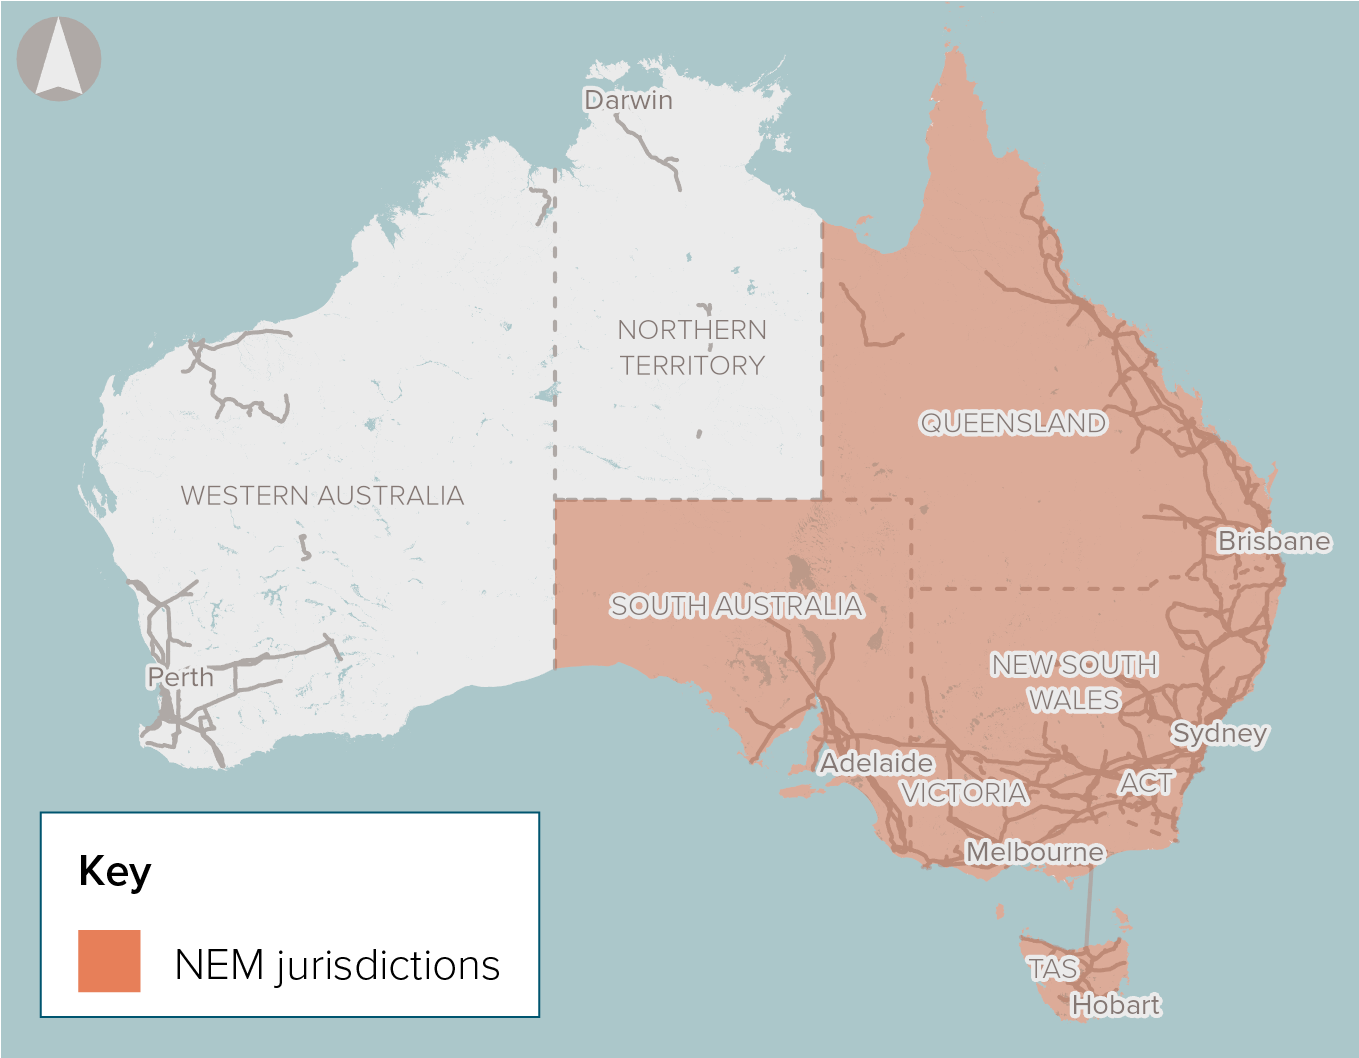 The National Electricity Market (NEM) in Australia is centered in the southern and eastern portions of the country, where the majority of Australians live. 